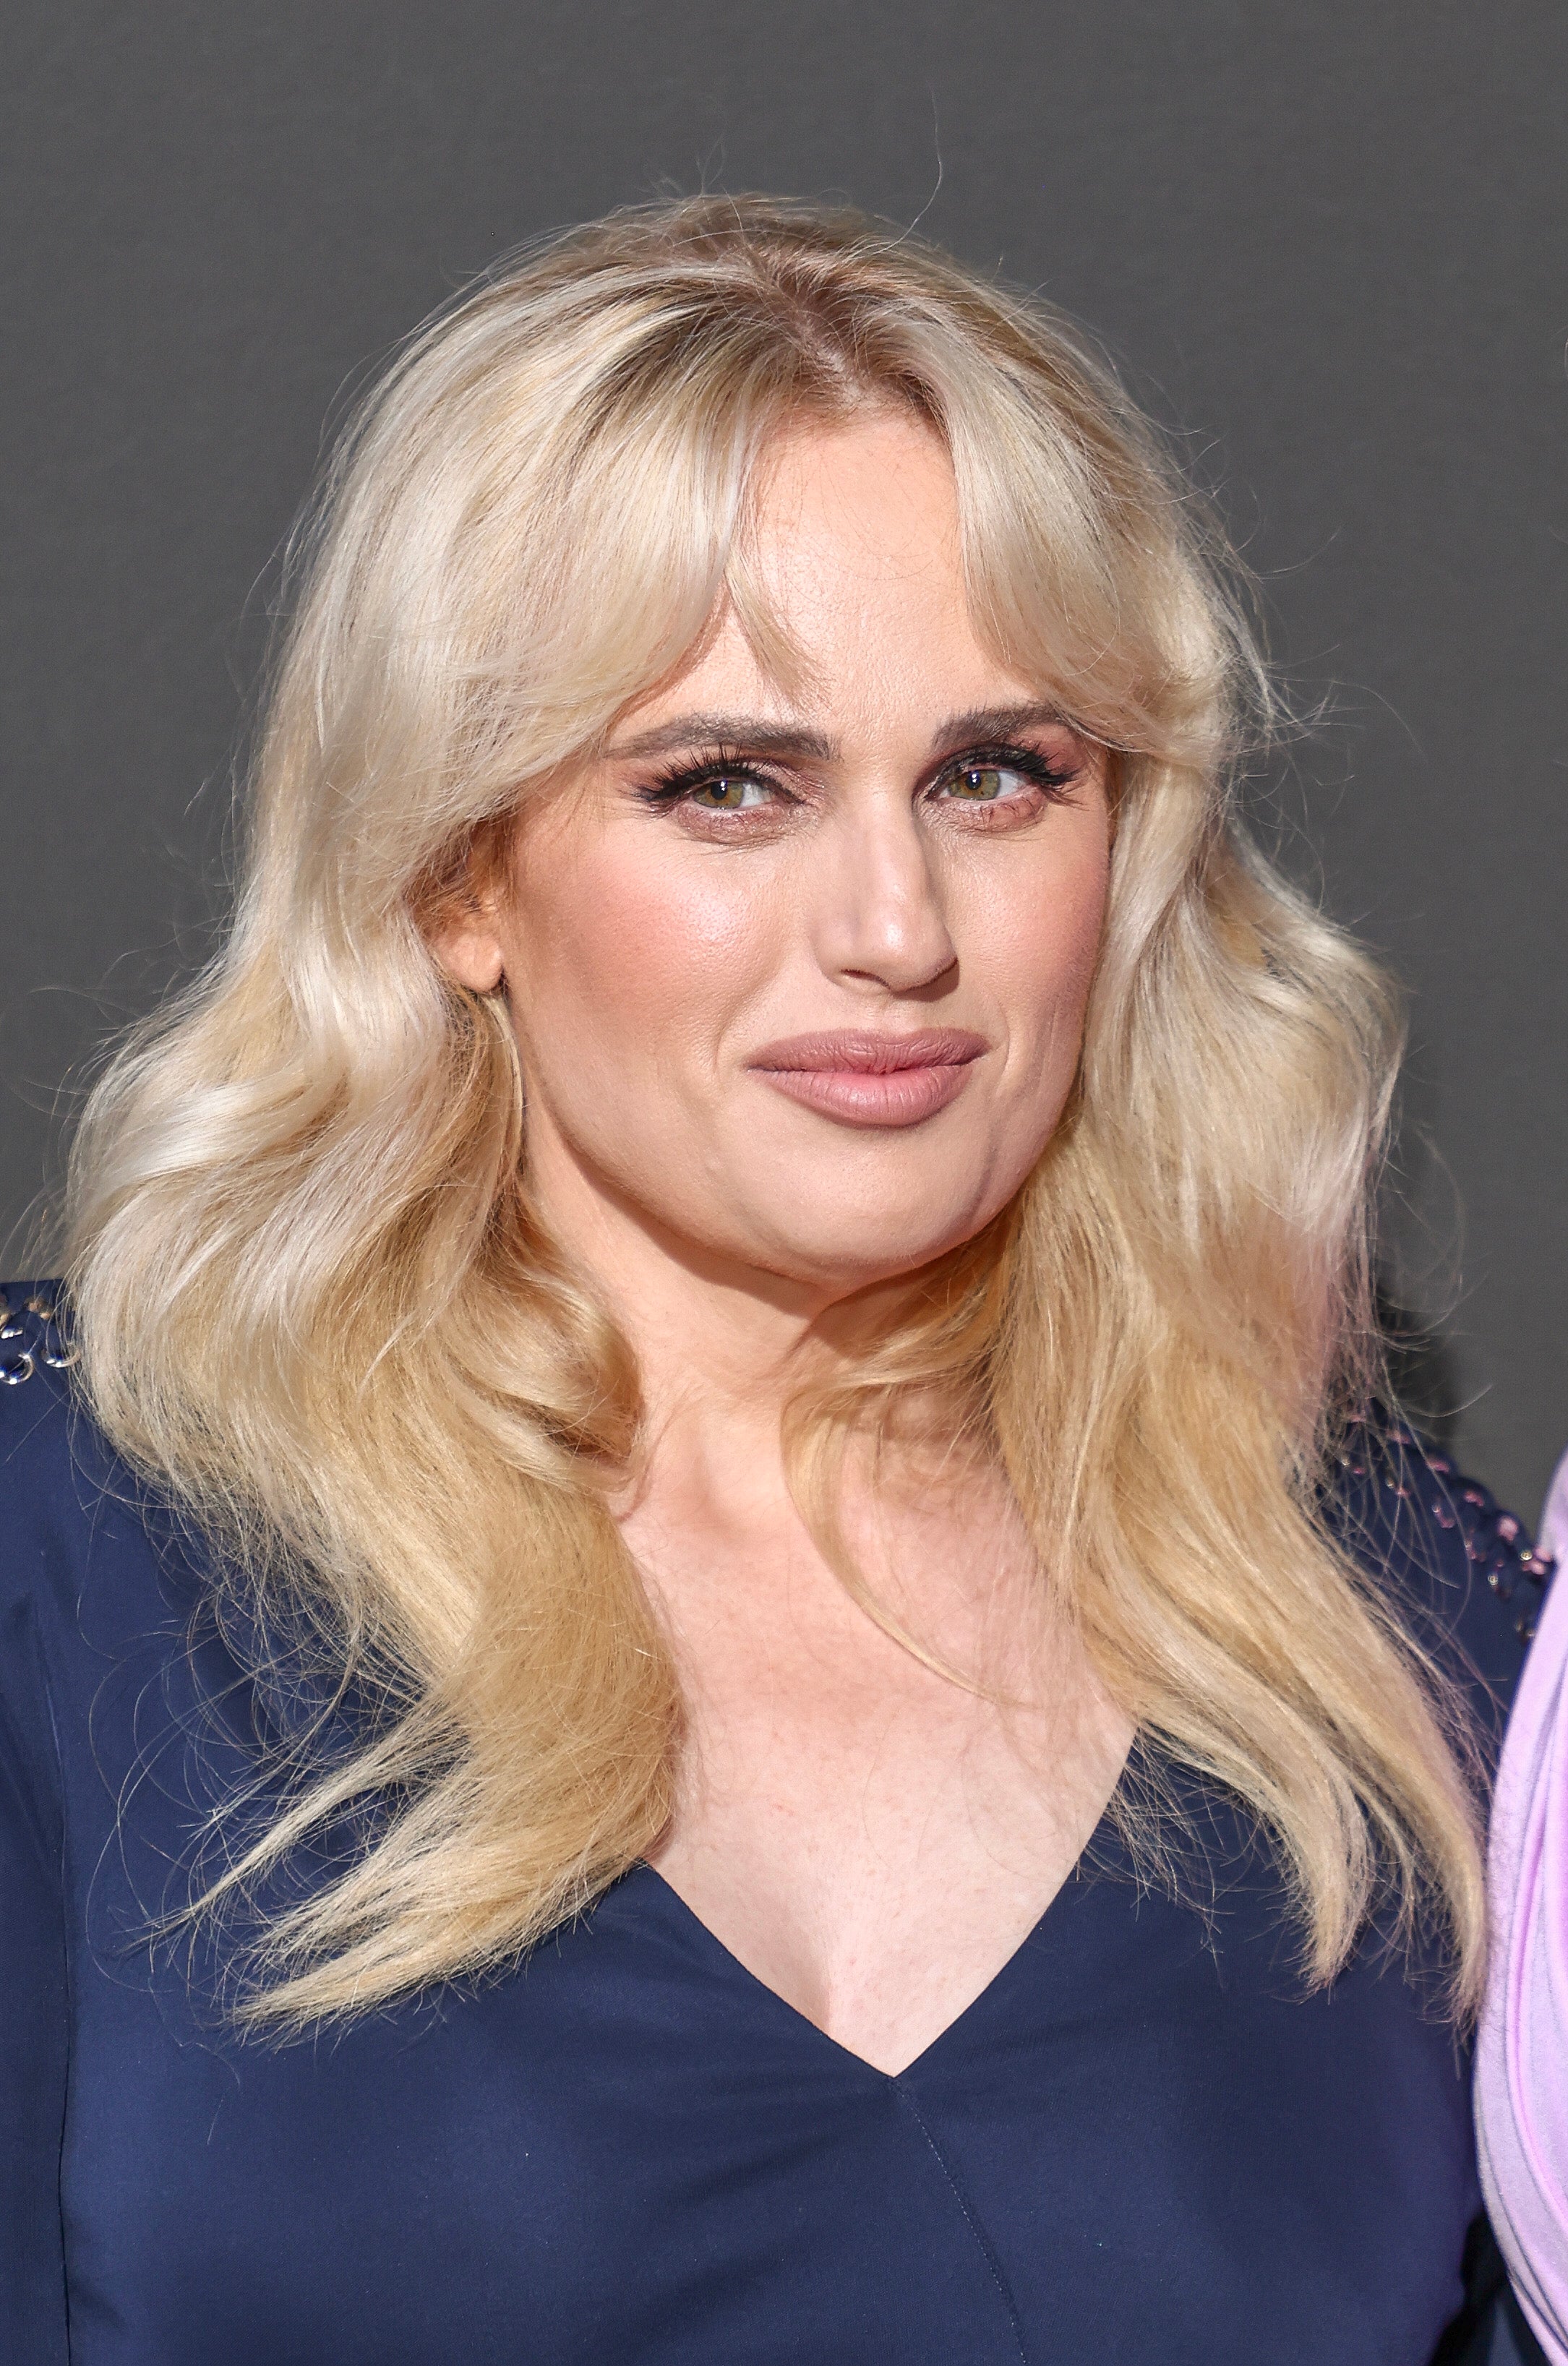 Rebel Wilson poses in a dress with wavy blonde hair